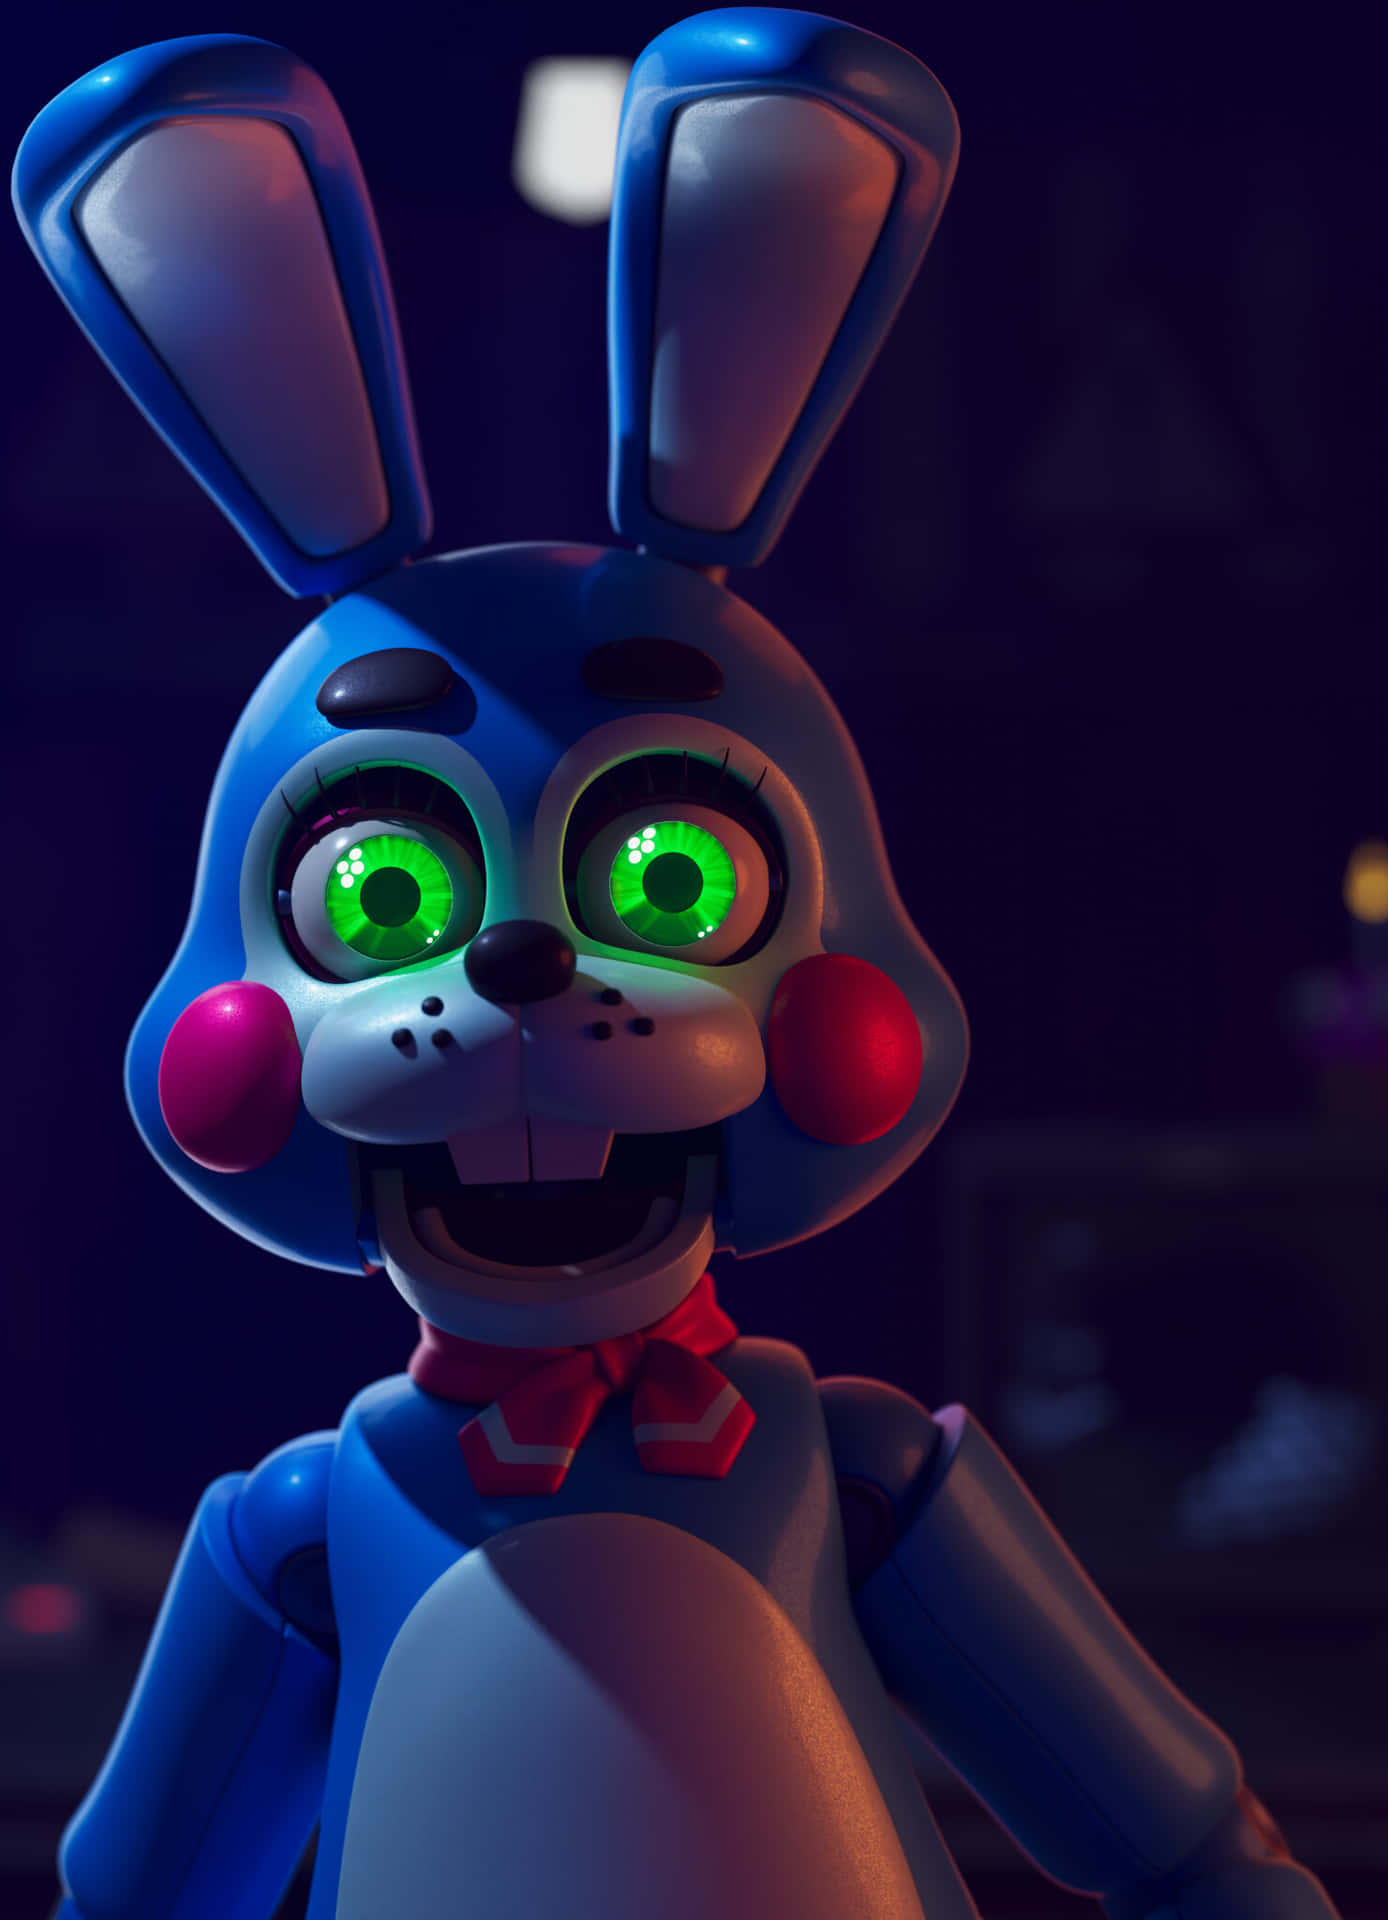 Prepare to be entertained by Toy Bonnie! Wallpaper